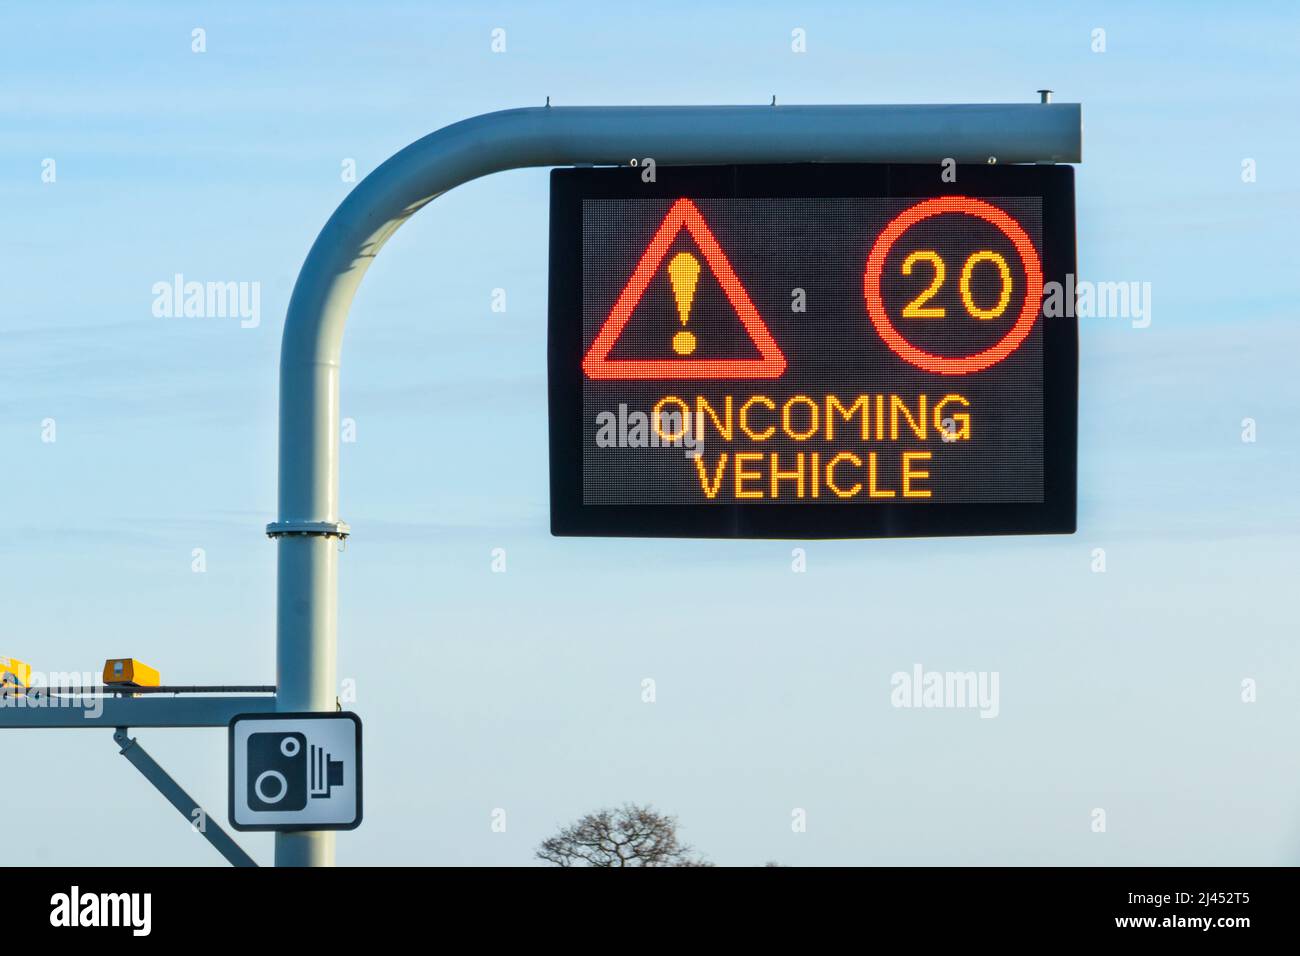 warning matrix sign on gantry with oncoming vehicle and 20 mph sign on M6 uk motorway Stock Photo